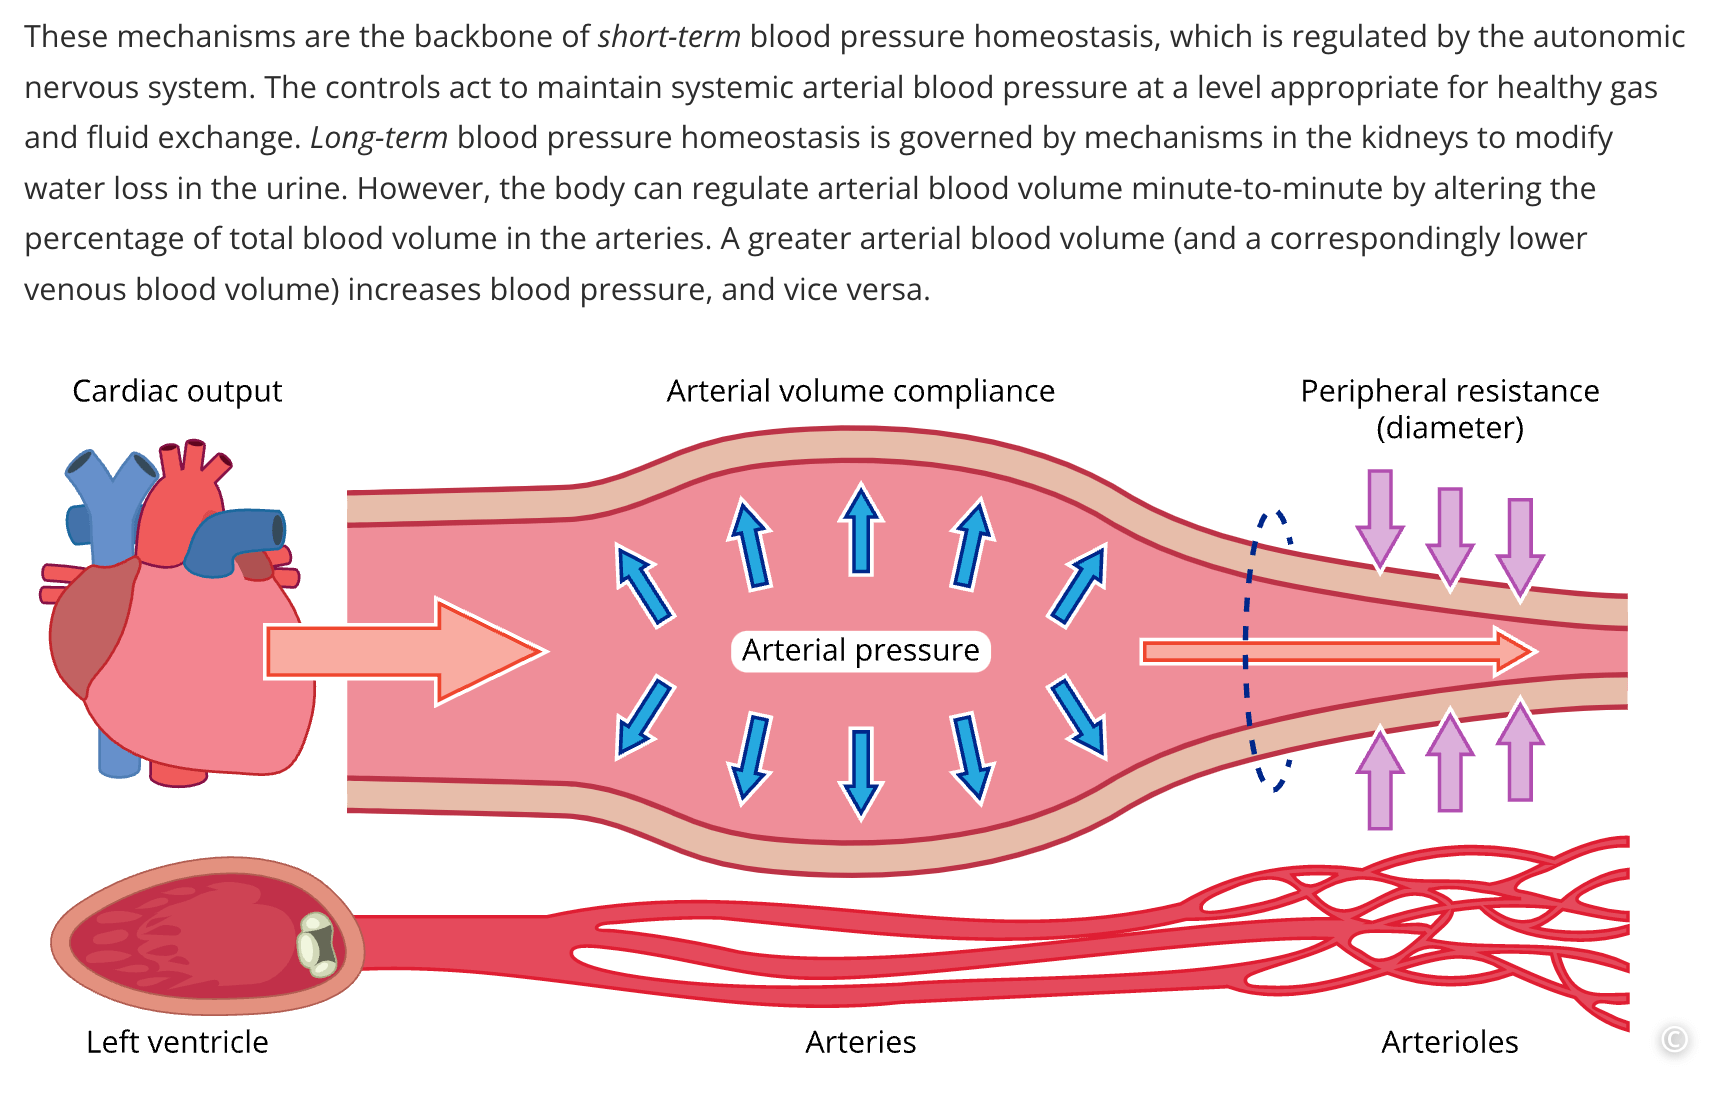 A screenshot of text and an image in Lt explaining the control of blood pressure.